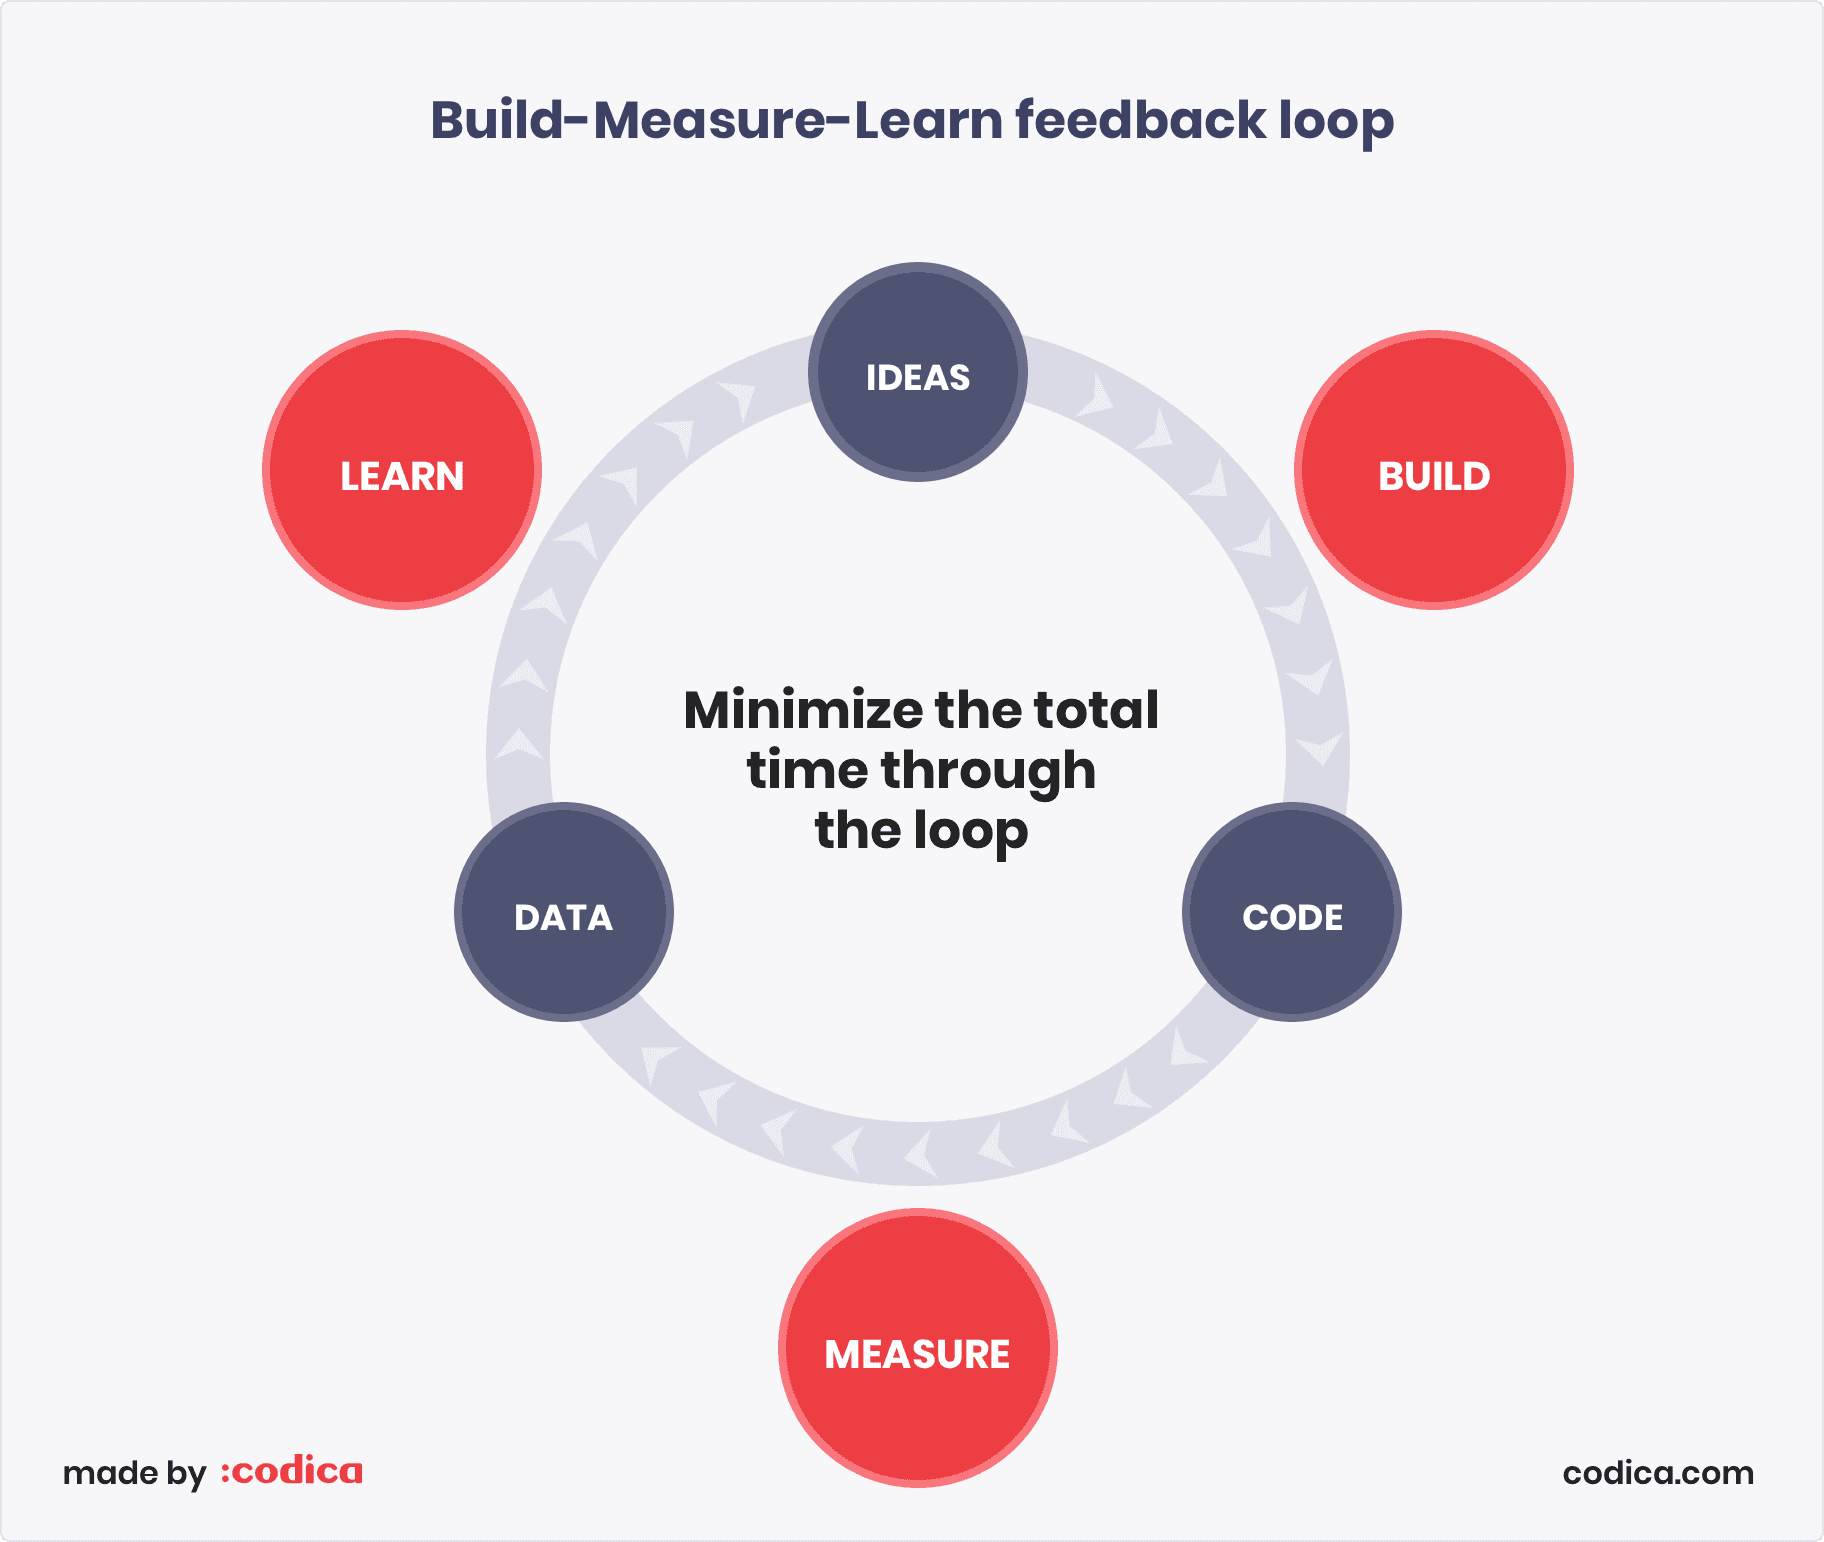 Illustration of the Build-Measure-Learn approach in action